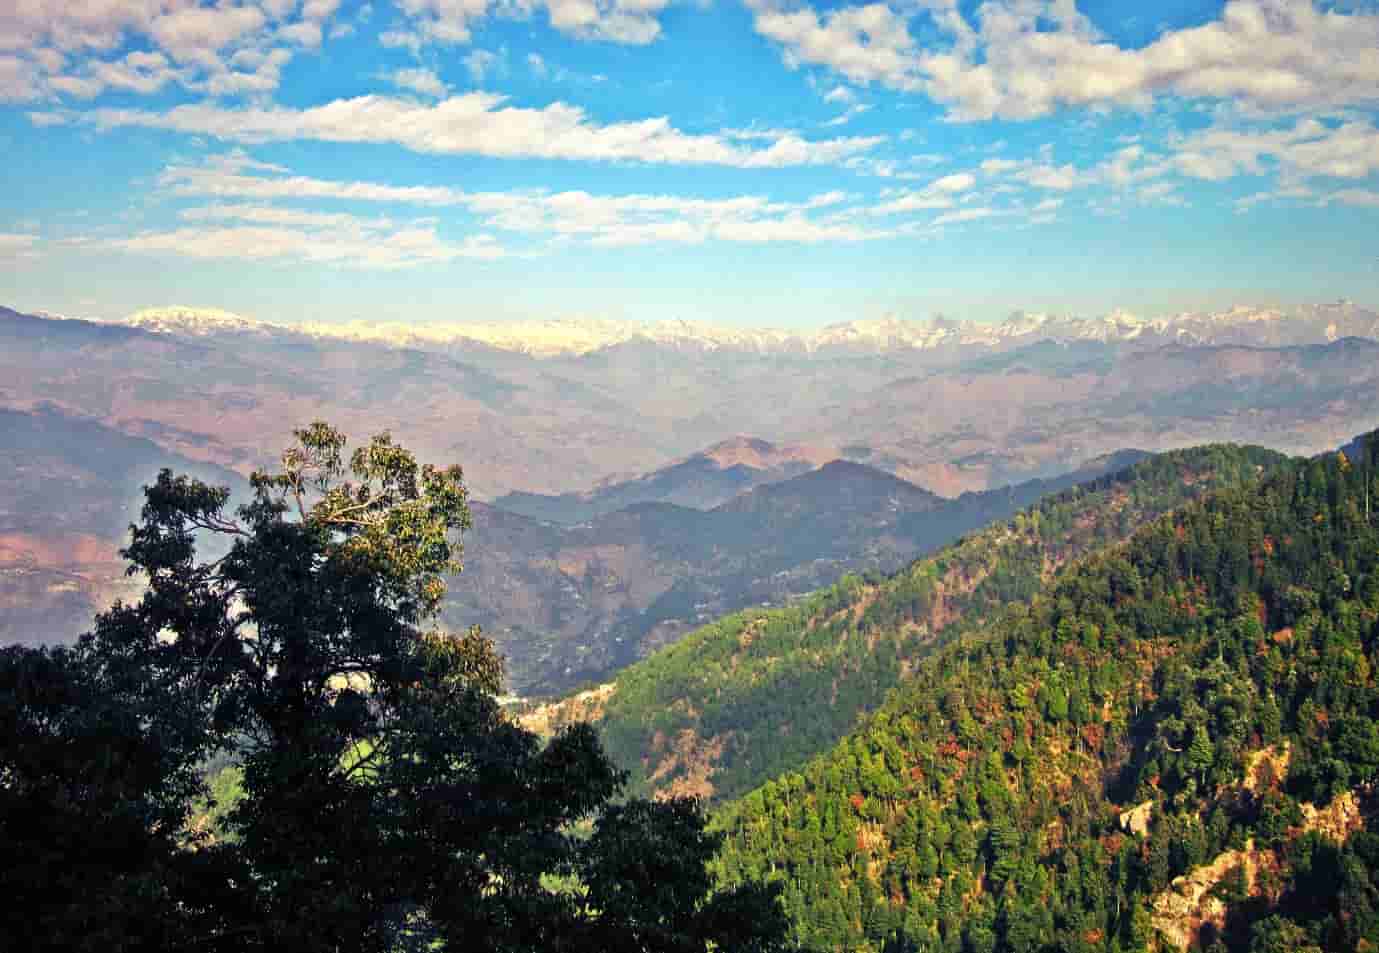 Dalhousie-is-Another-beautiful-hill-station-tucked-away-in-the-Himalayas-of-Himachal-Pradesh